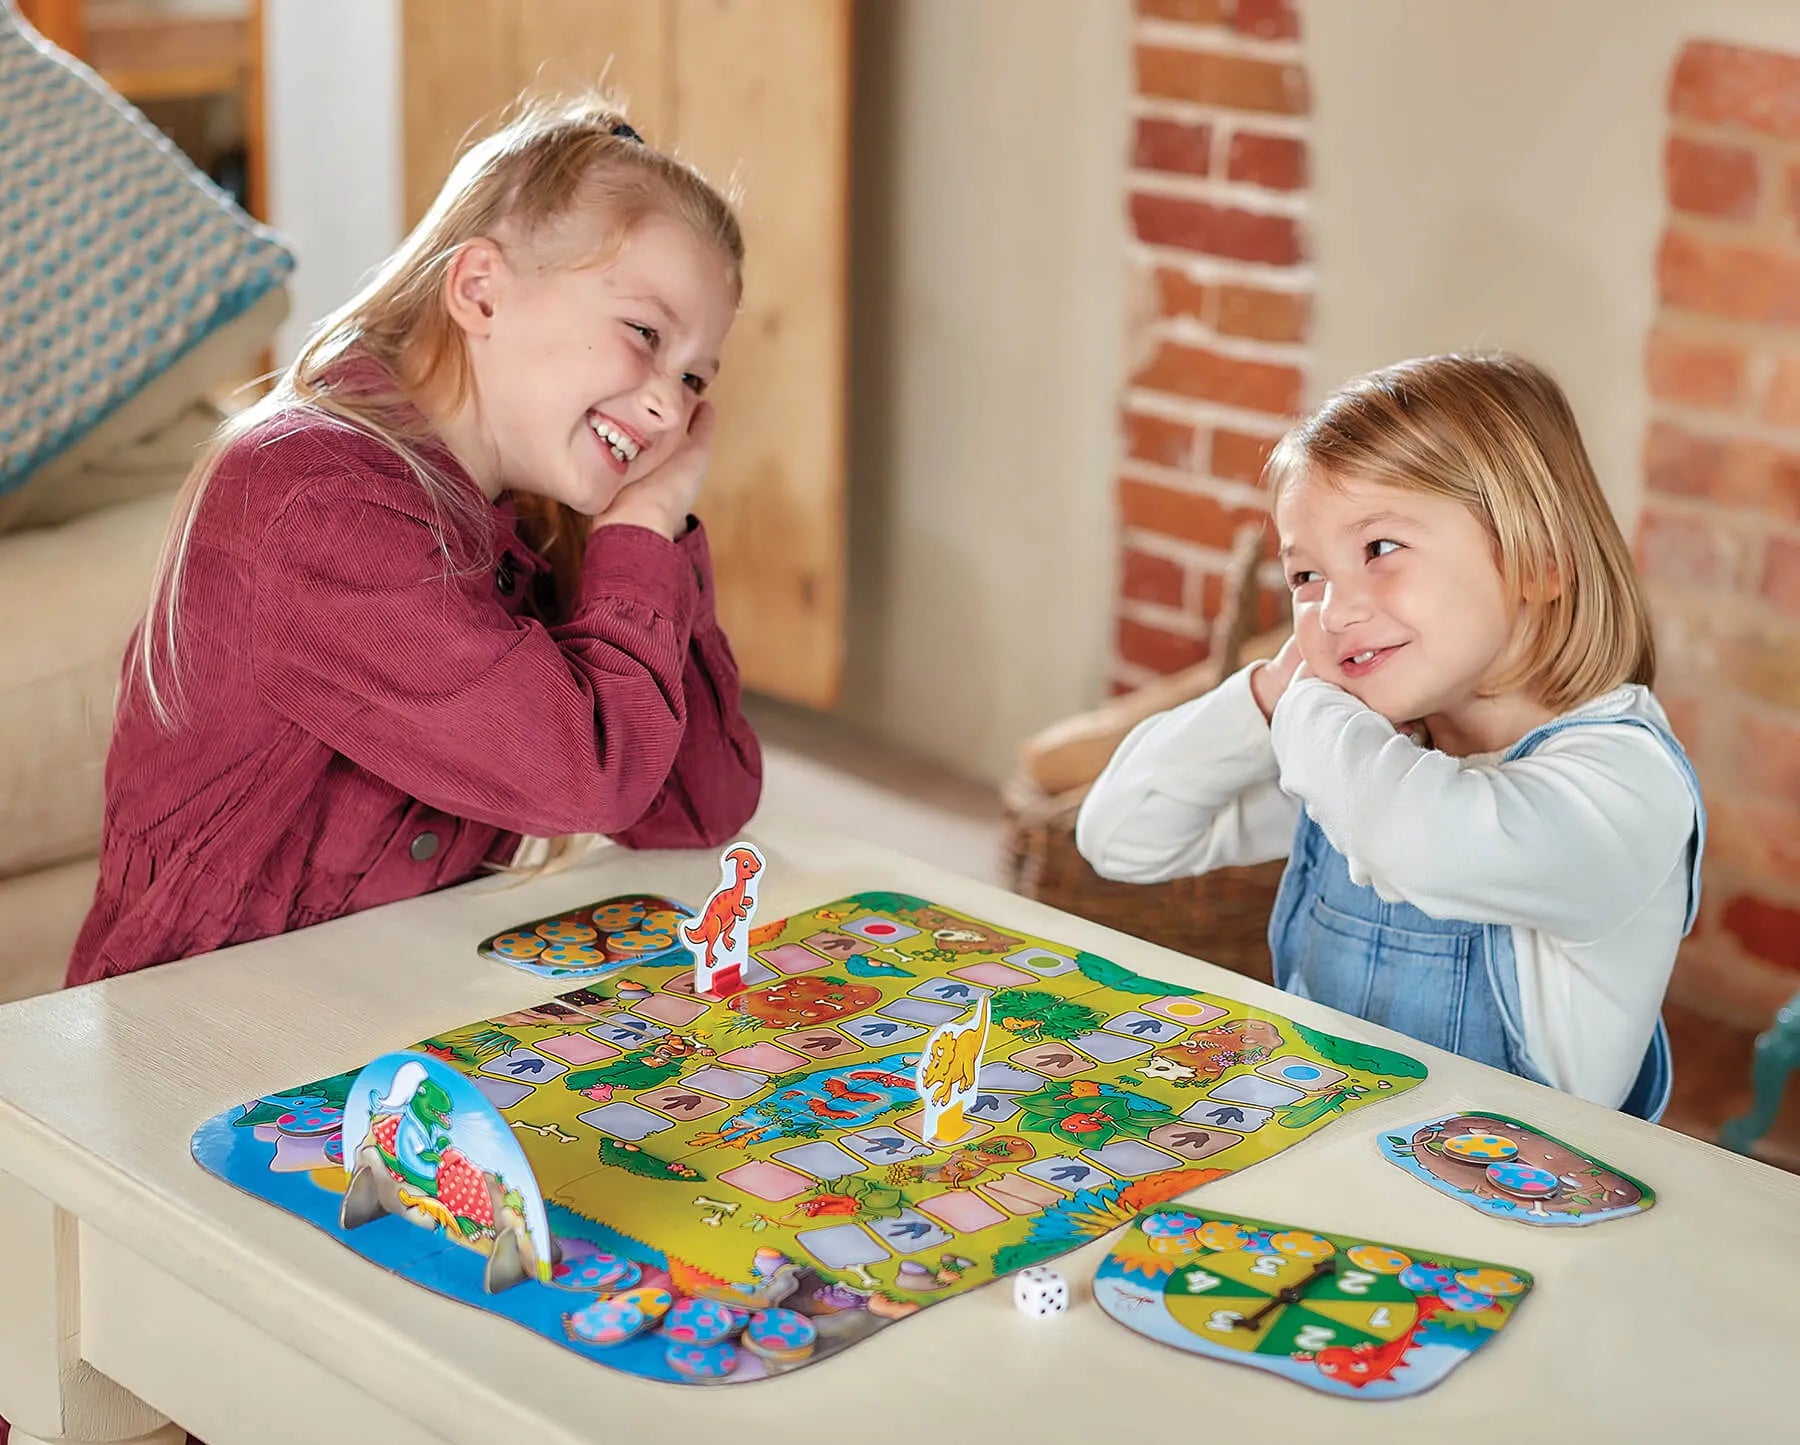 Children playing and enjoying Dino-Snore-Us from Orchard toys